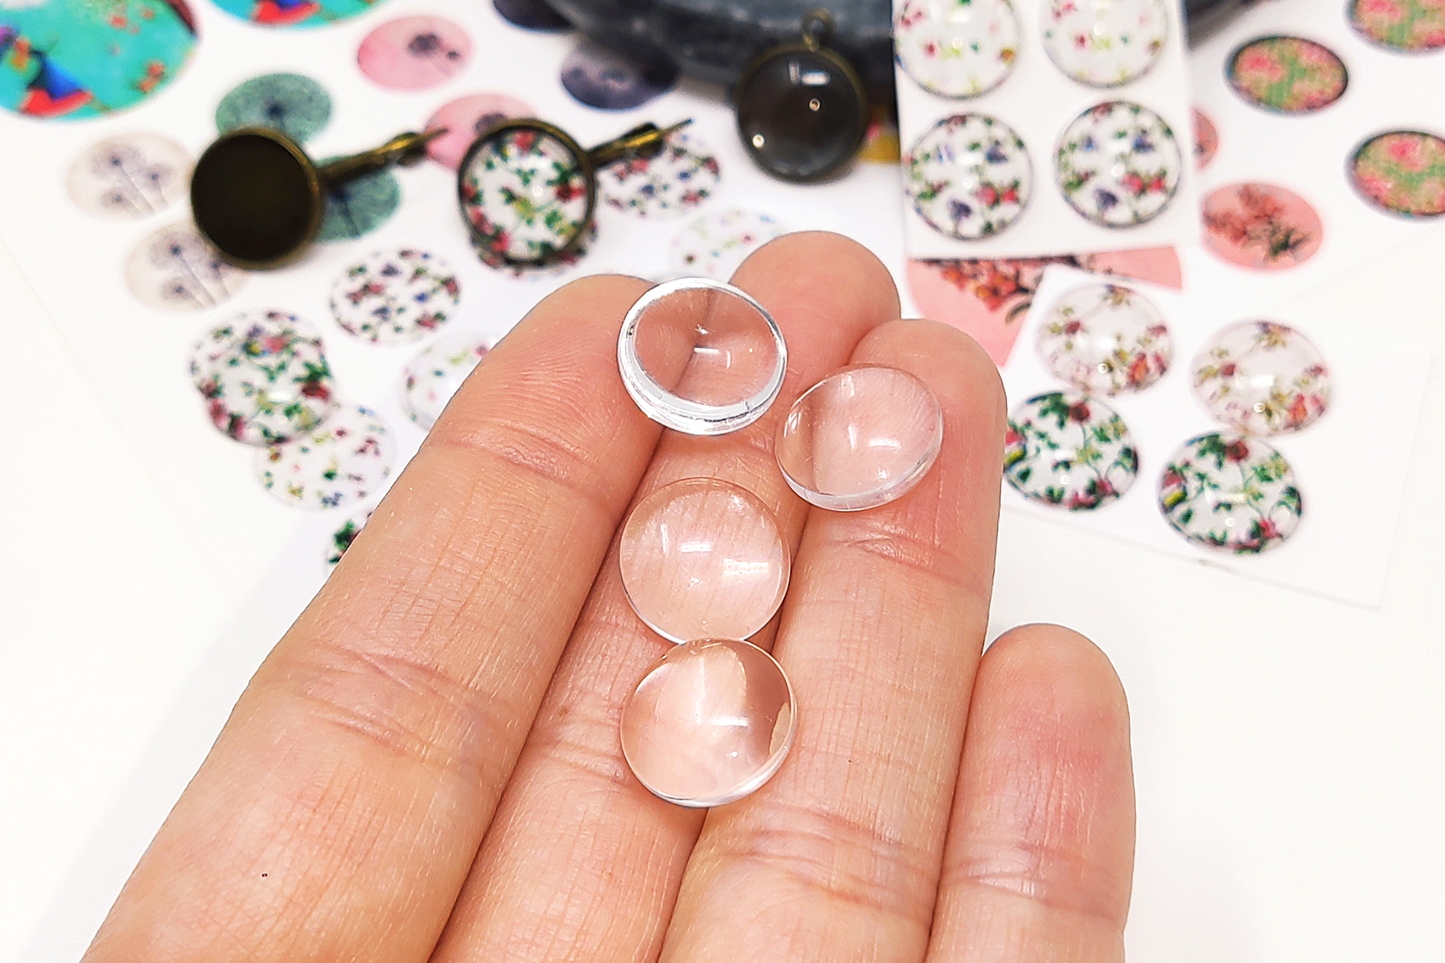 50 pcs Round Flat Back Clear Glass Cabochon Transparent Cabochon For DIY Jewelry